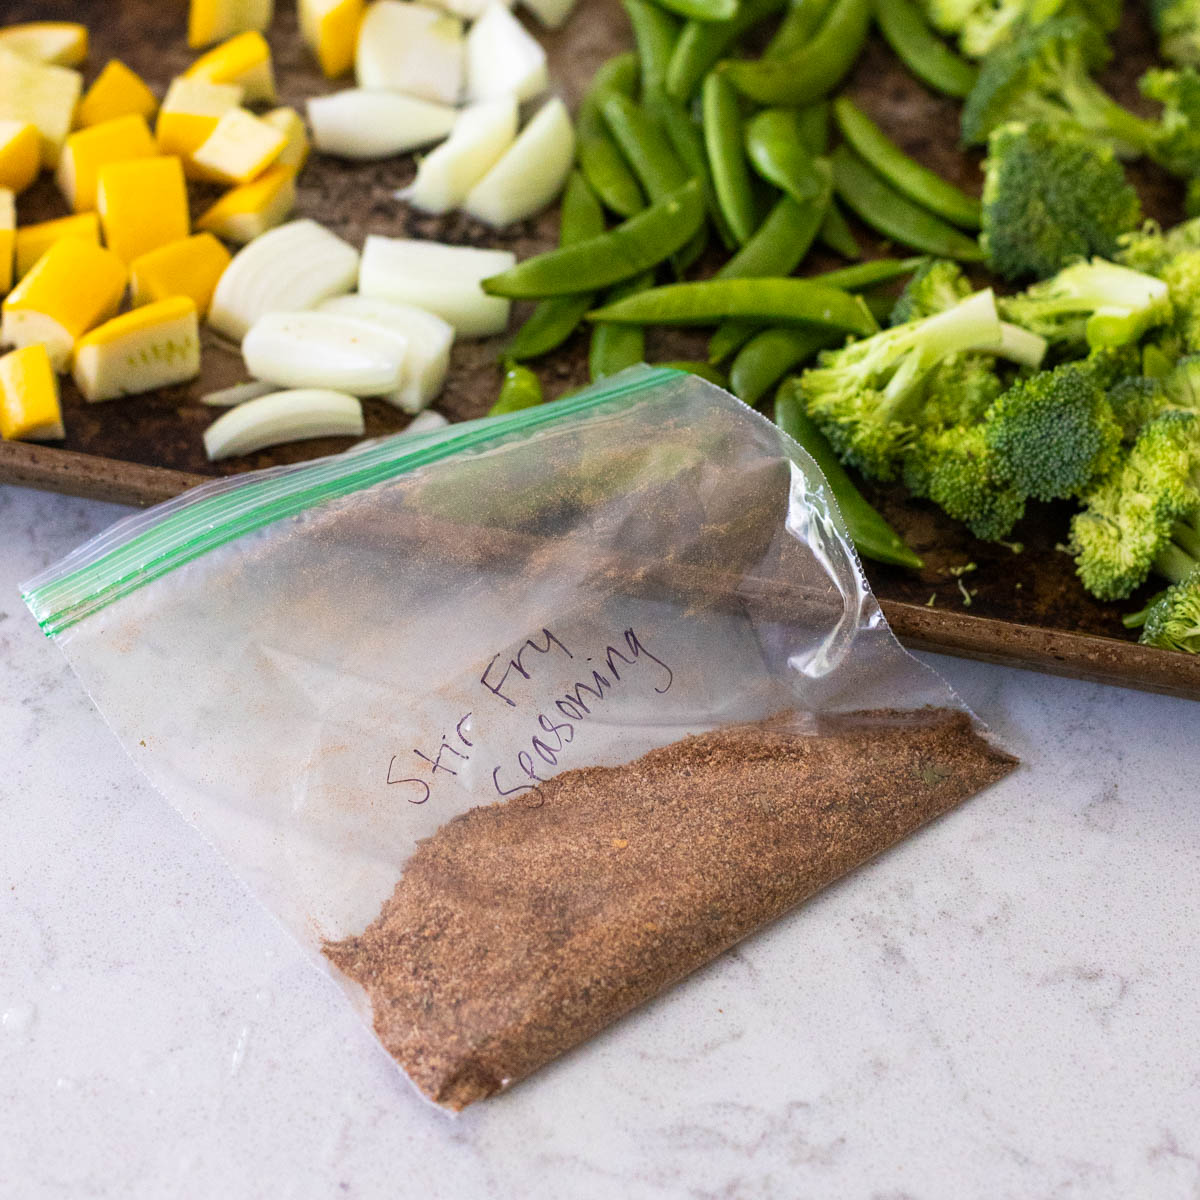 A bag of seasoning is on the counter next to a pan of vegetables.